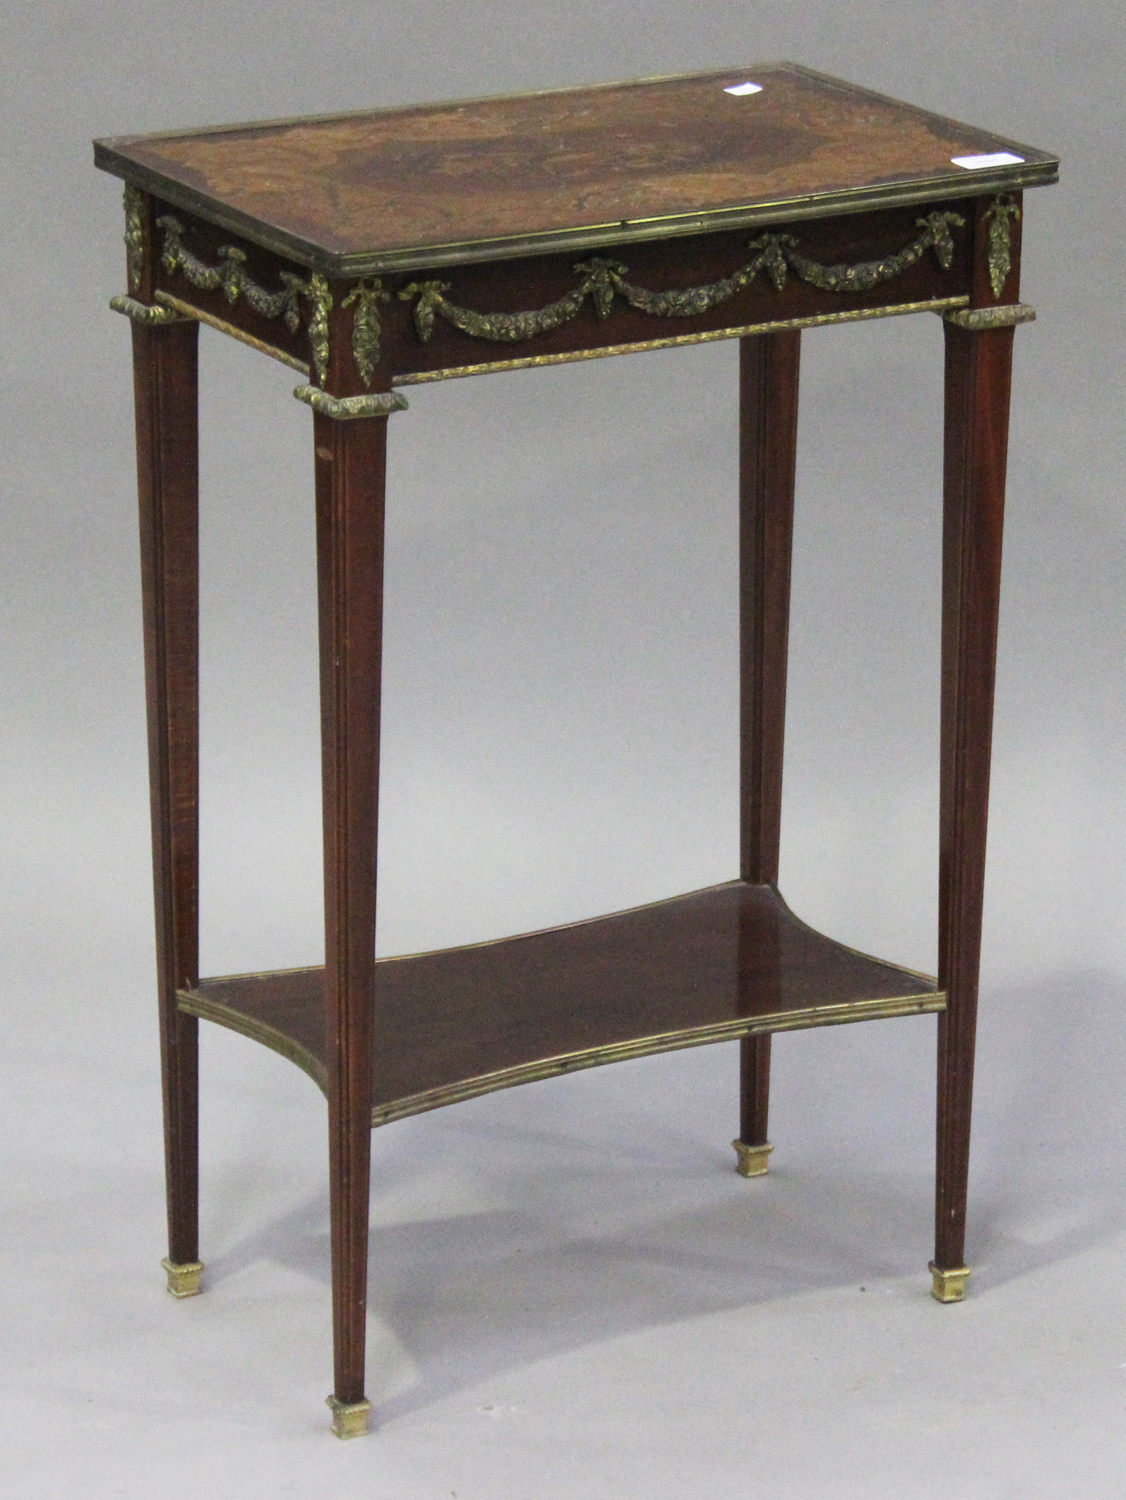 A 20th century Louis XVI style kingwood and gilt metal mounted occasional table, the frieze fitted